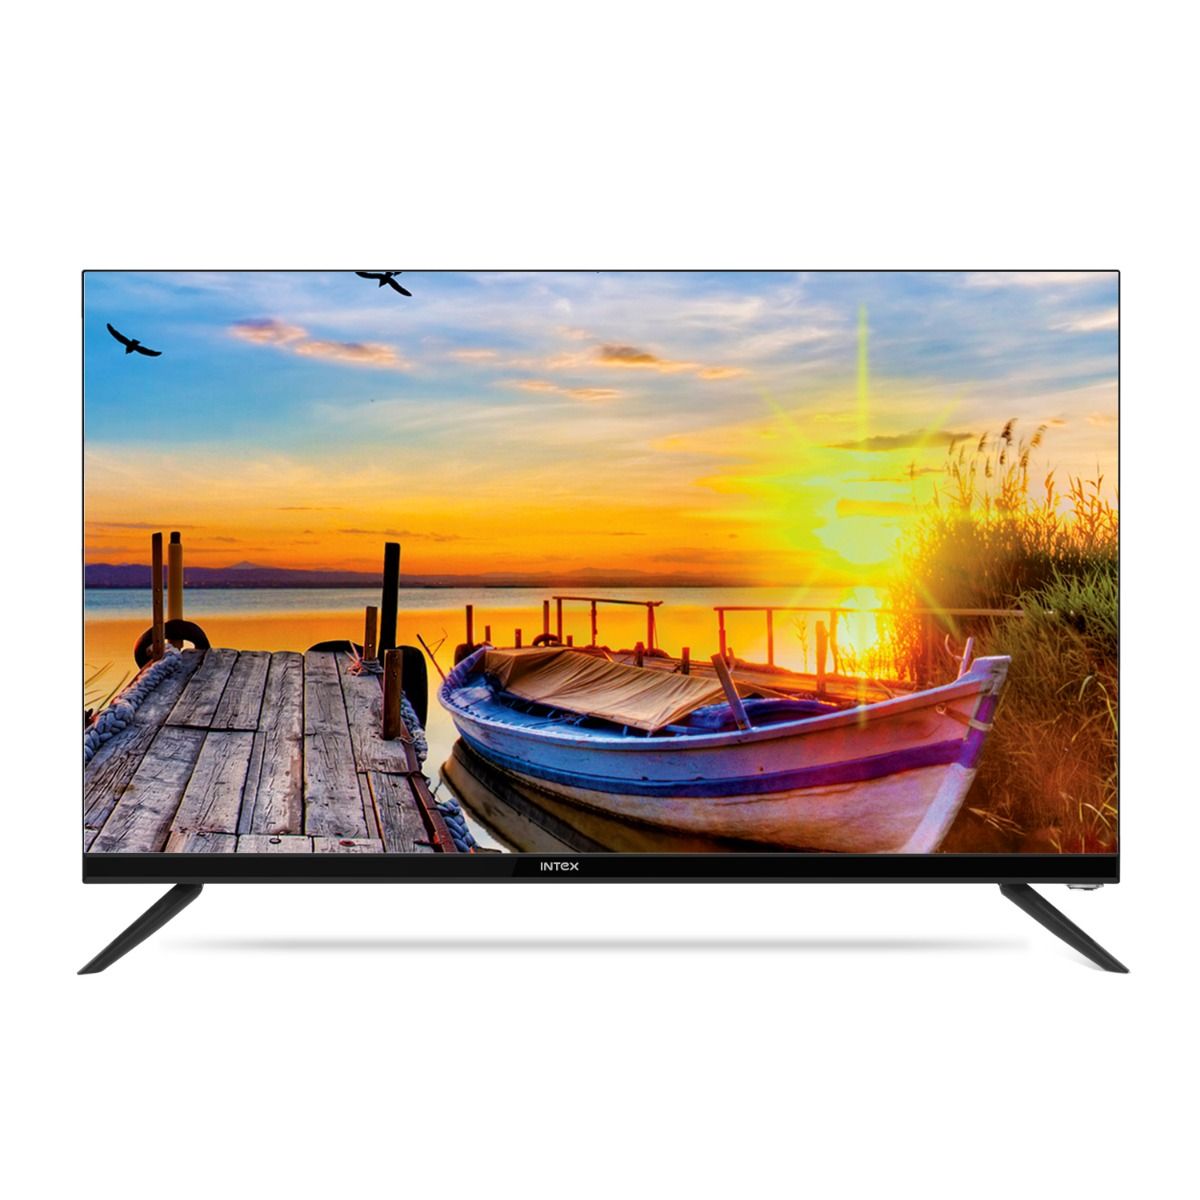 INTEX 32 Inch Android LED TV